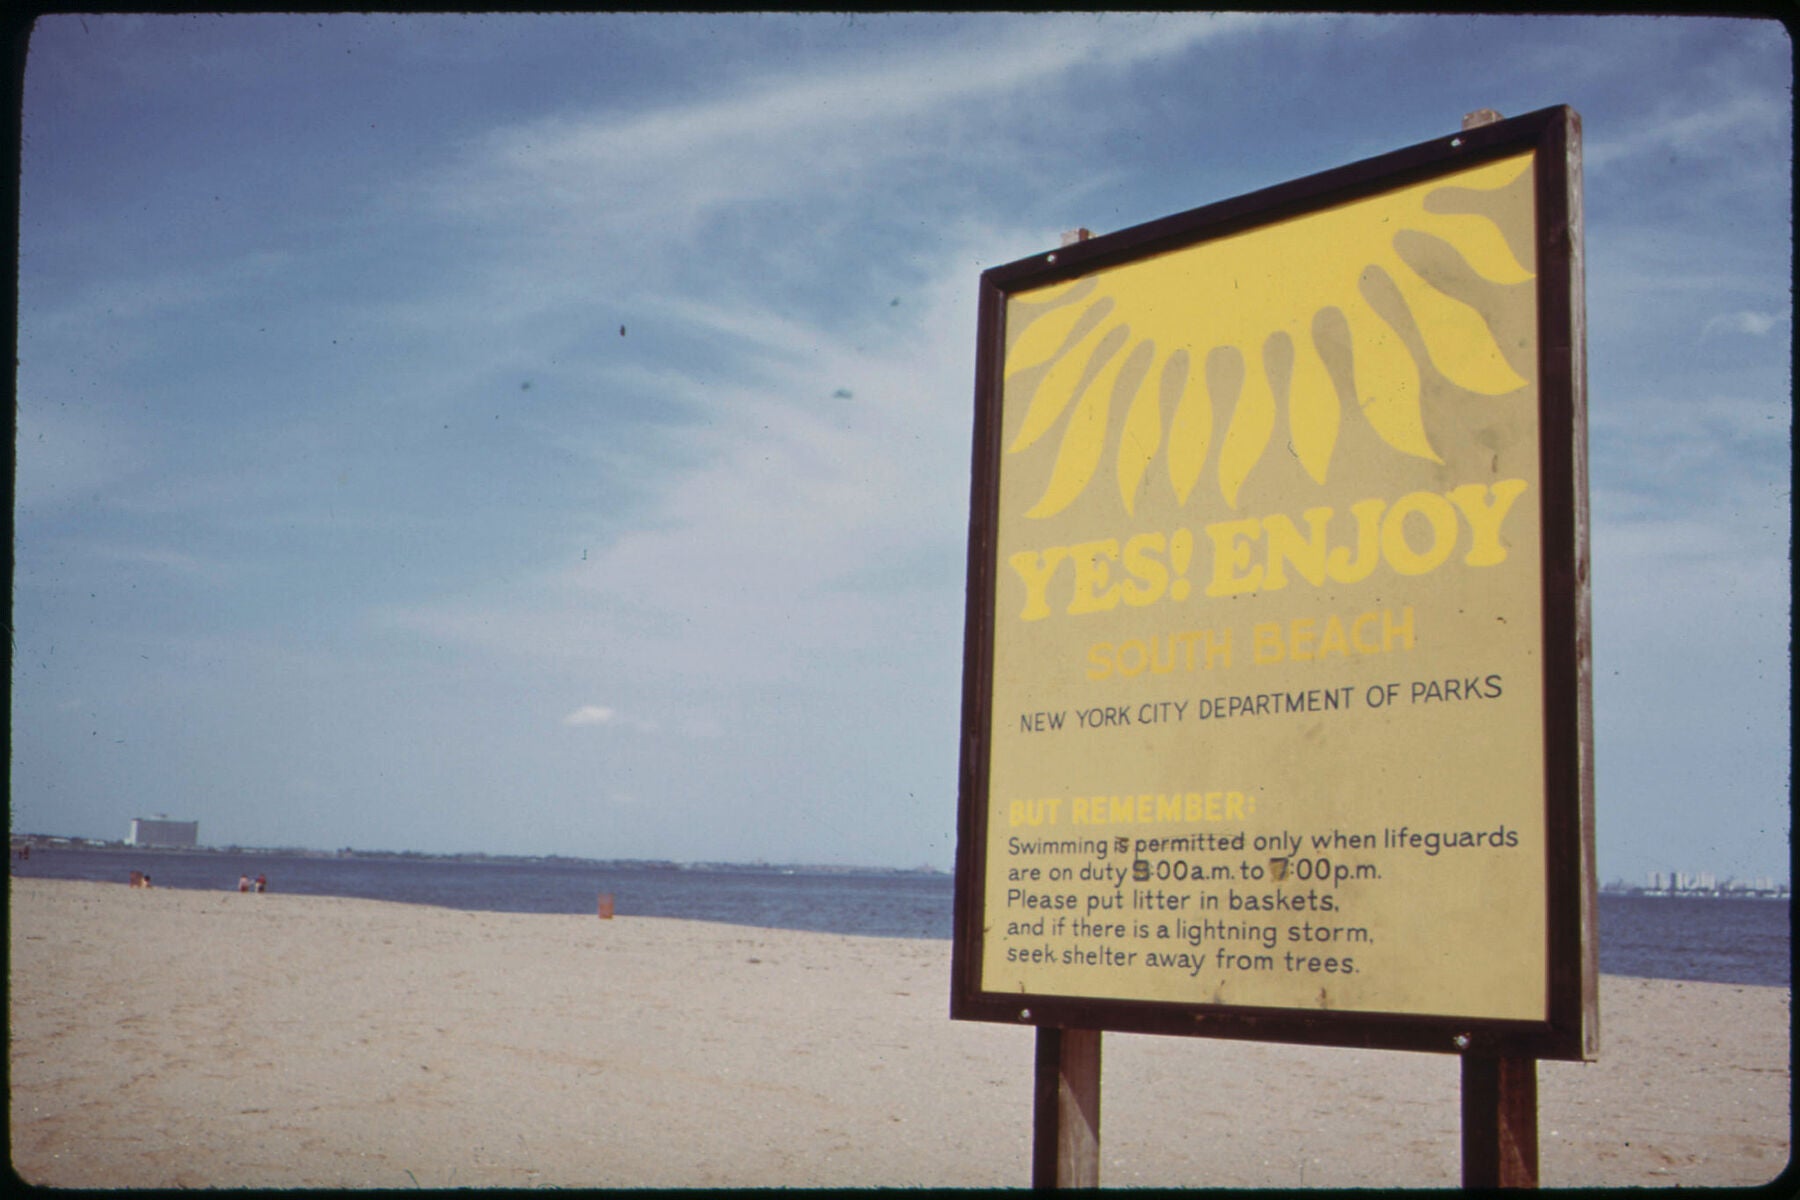 South Beach, Staten Island, Is Safe for Swimming by Arthur Tress - 1973